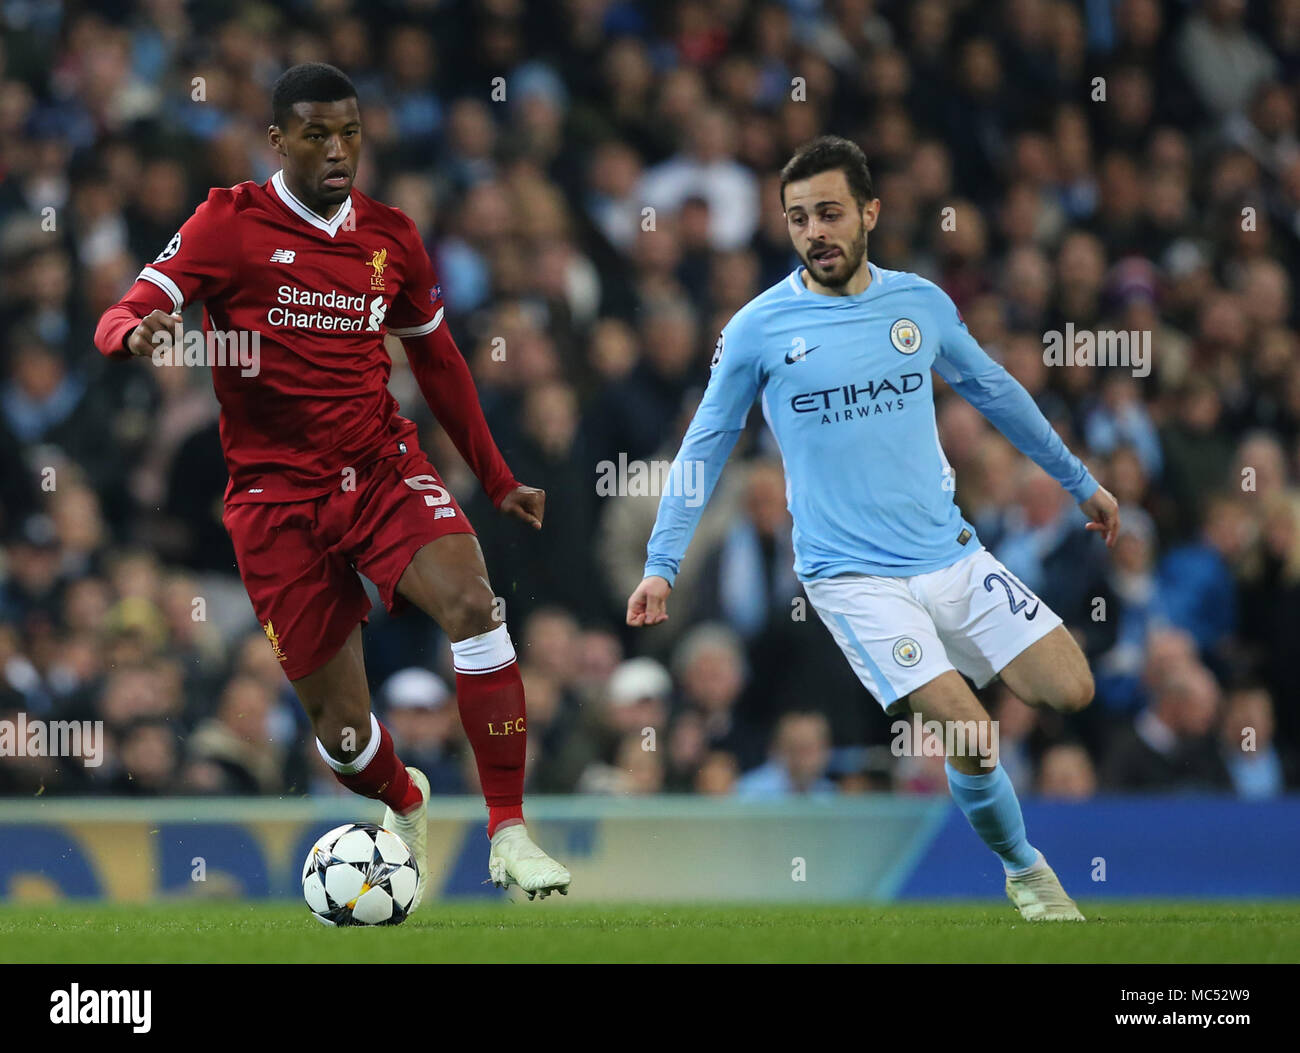 MANCHESTER, ENGLAND - APRIL 10: Georginio Wijnaldum of Liverpool during the Champions League quarter final second leg match between Manchester City and Liverpool at the Etihad Stadium on April 10, 2018 in Manchester, United Kingdom. Stock Photo